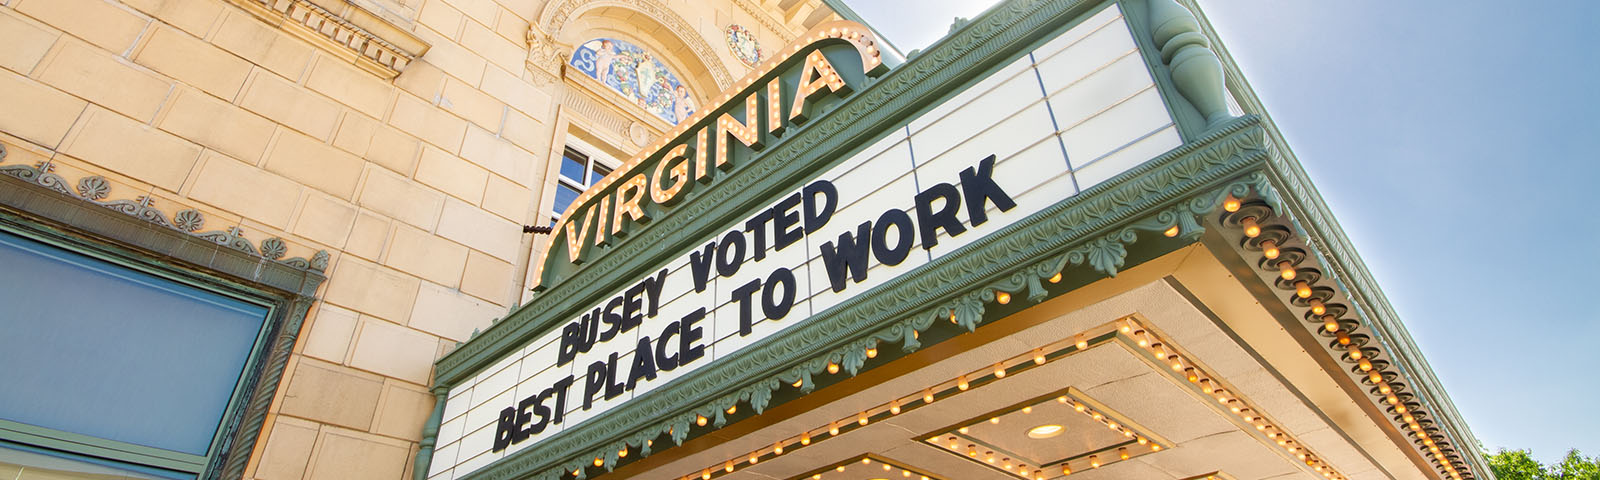 Busey voted Best Place to work